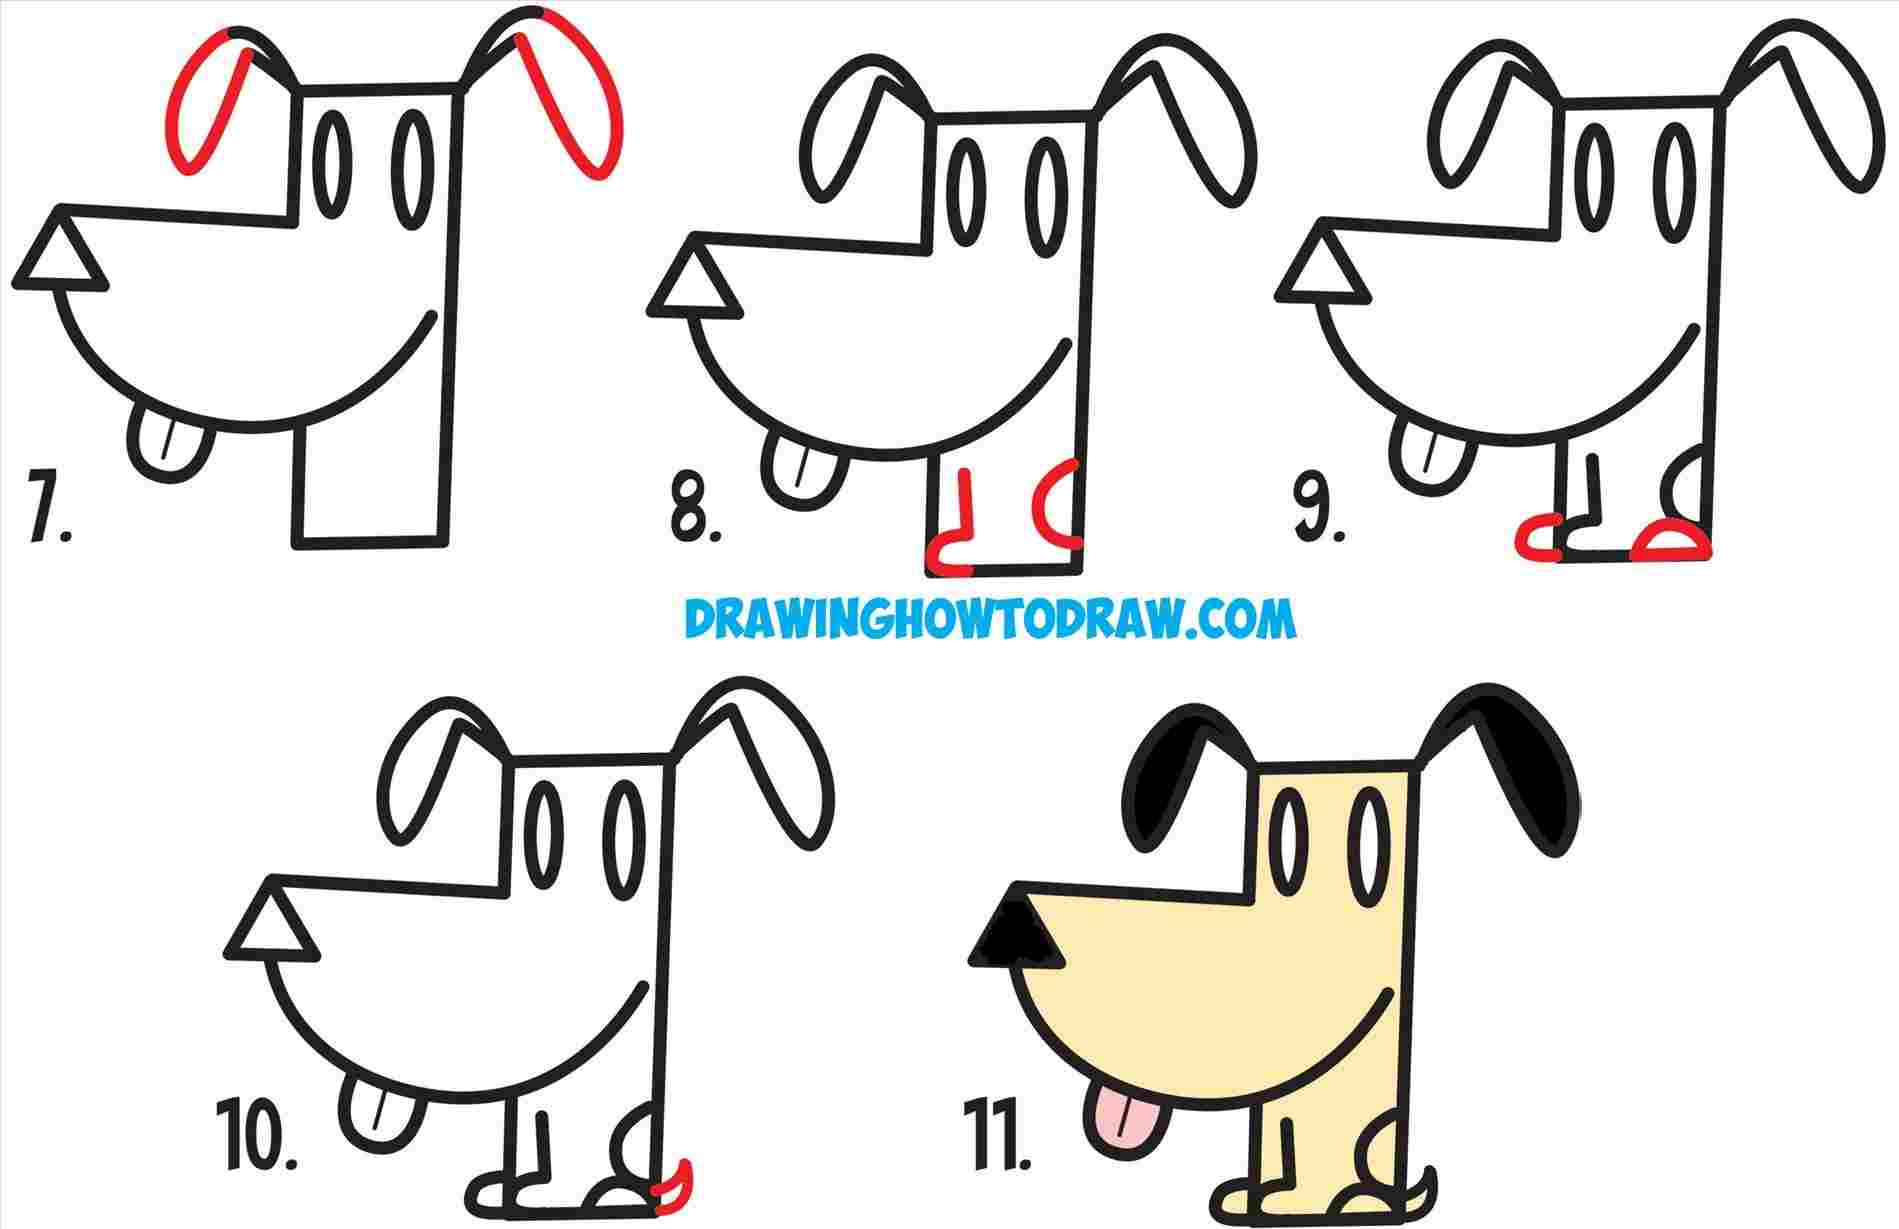 Cute Dog Cartoon Drawing | Free download on ClipArtMag